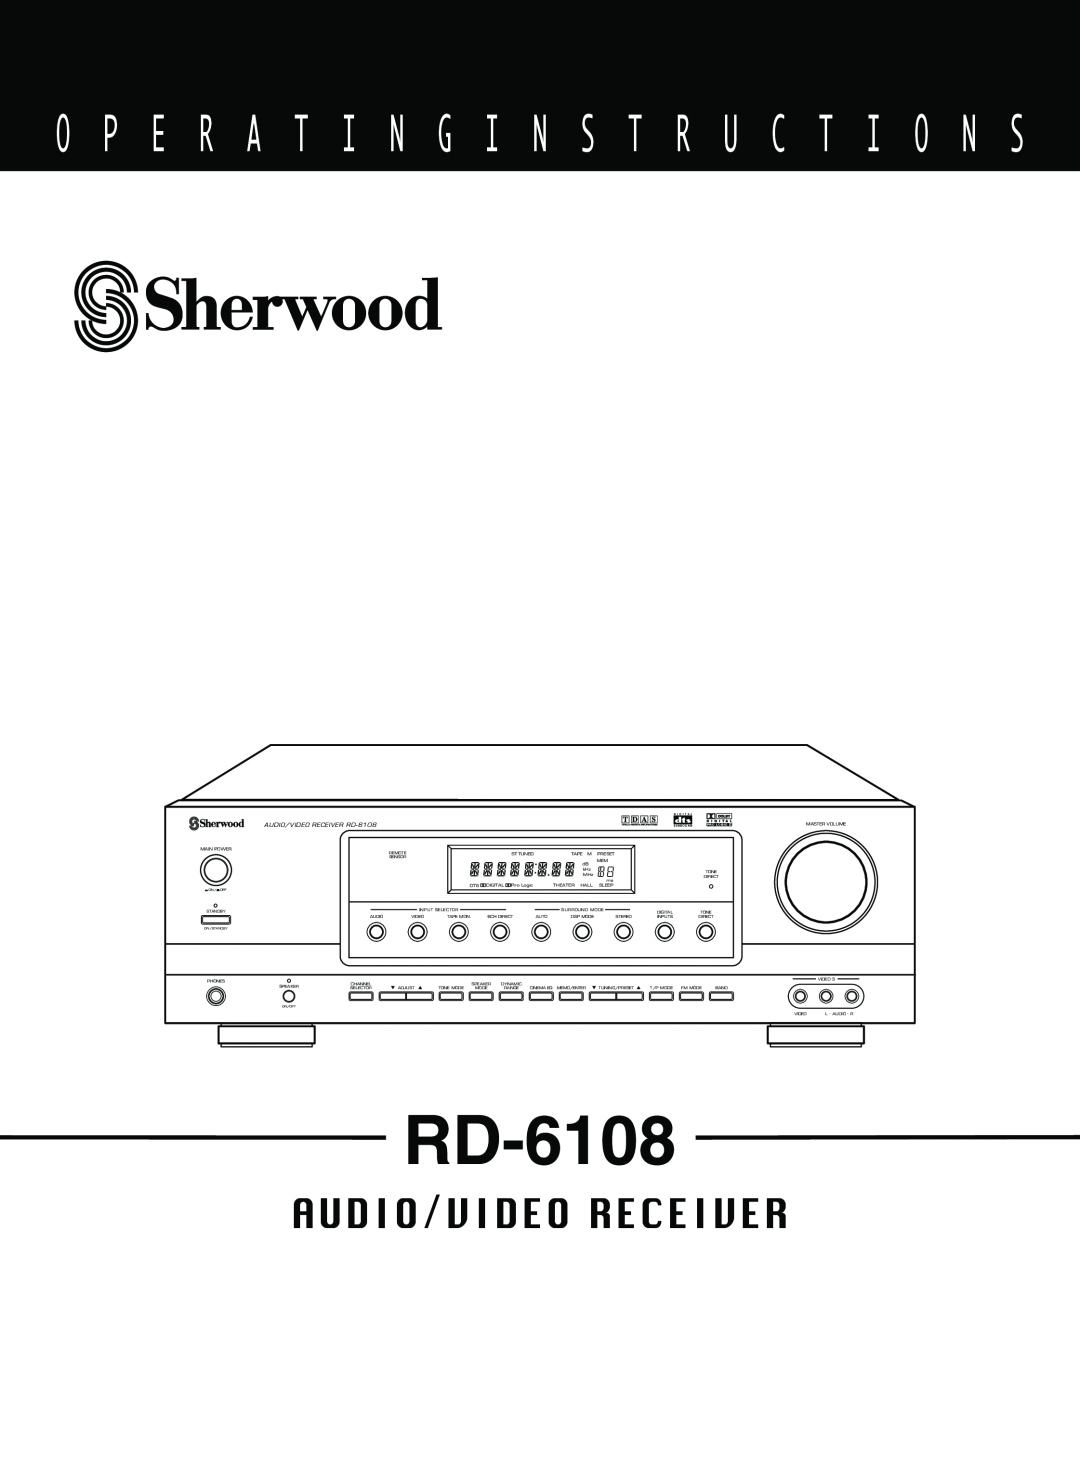 Sherwood manual O P E R A T I N G I N S T R U C T I O N S, Audio/Video Receiver, AUDIO/VIDEO RECEIVER RD-6108 